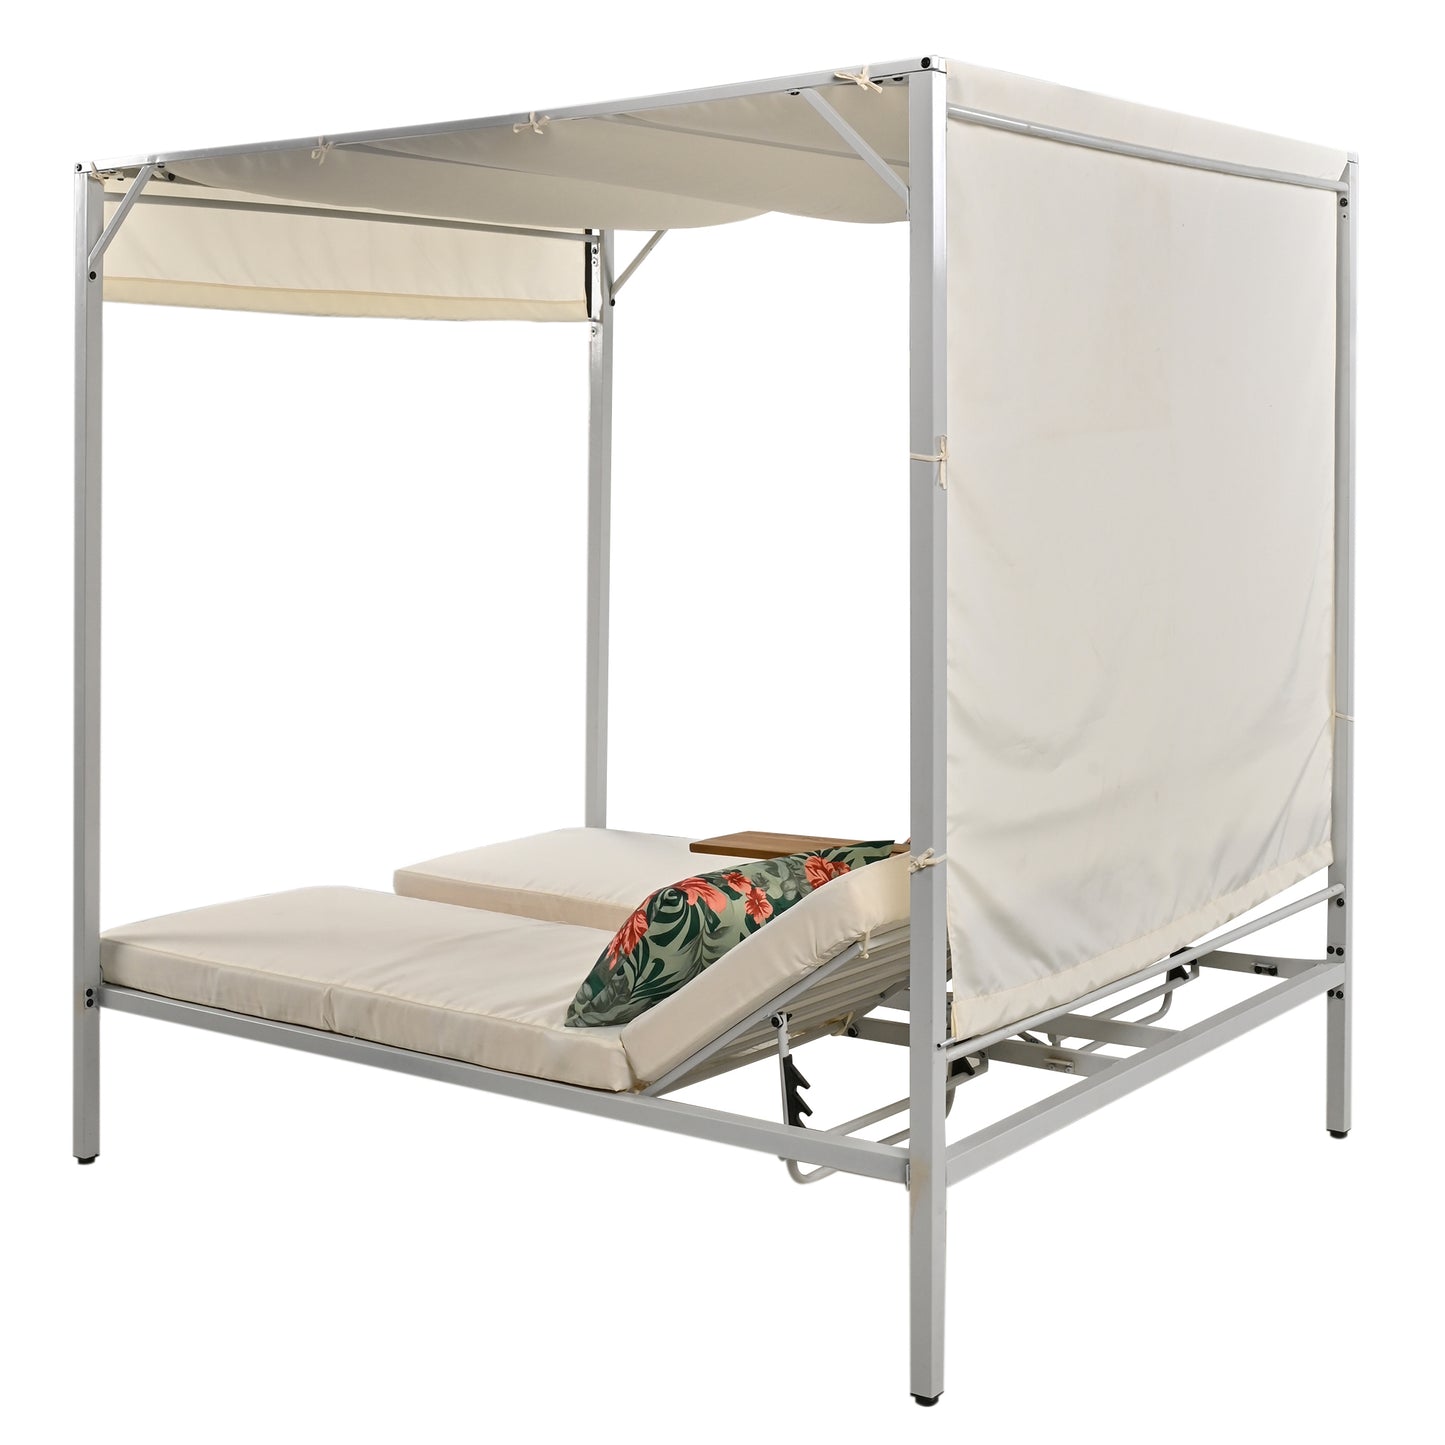 U_STYLE Adjustable Outdoor Patio Sunbed Daybed with Cushions